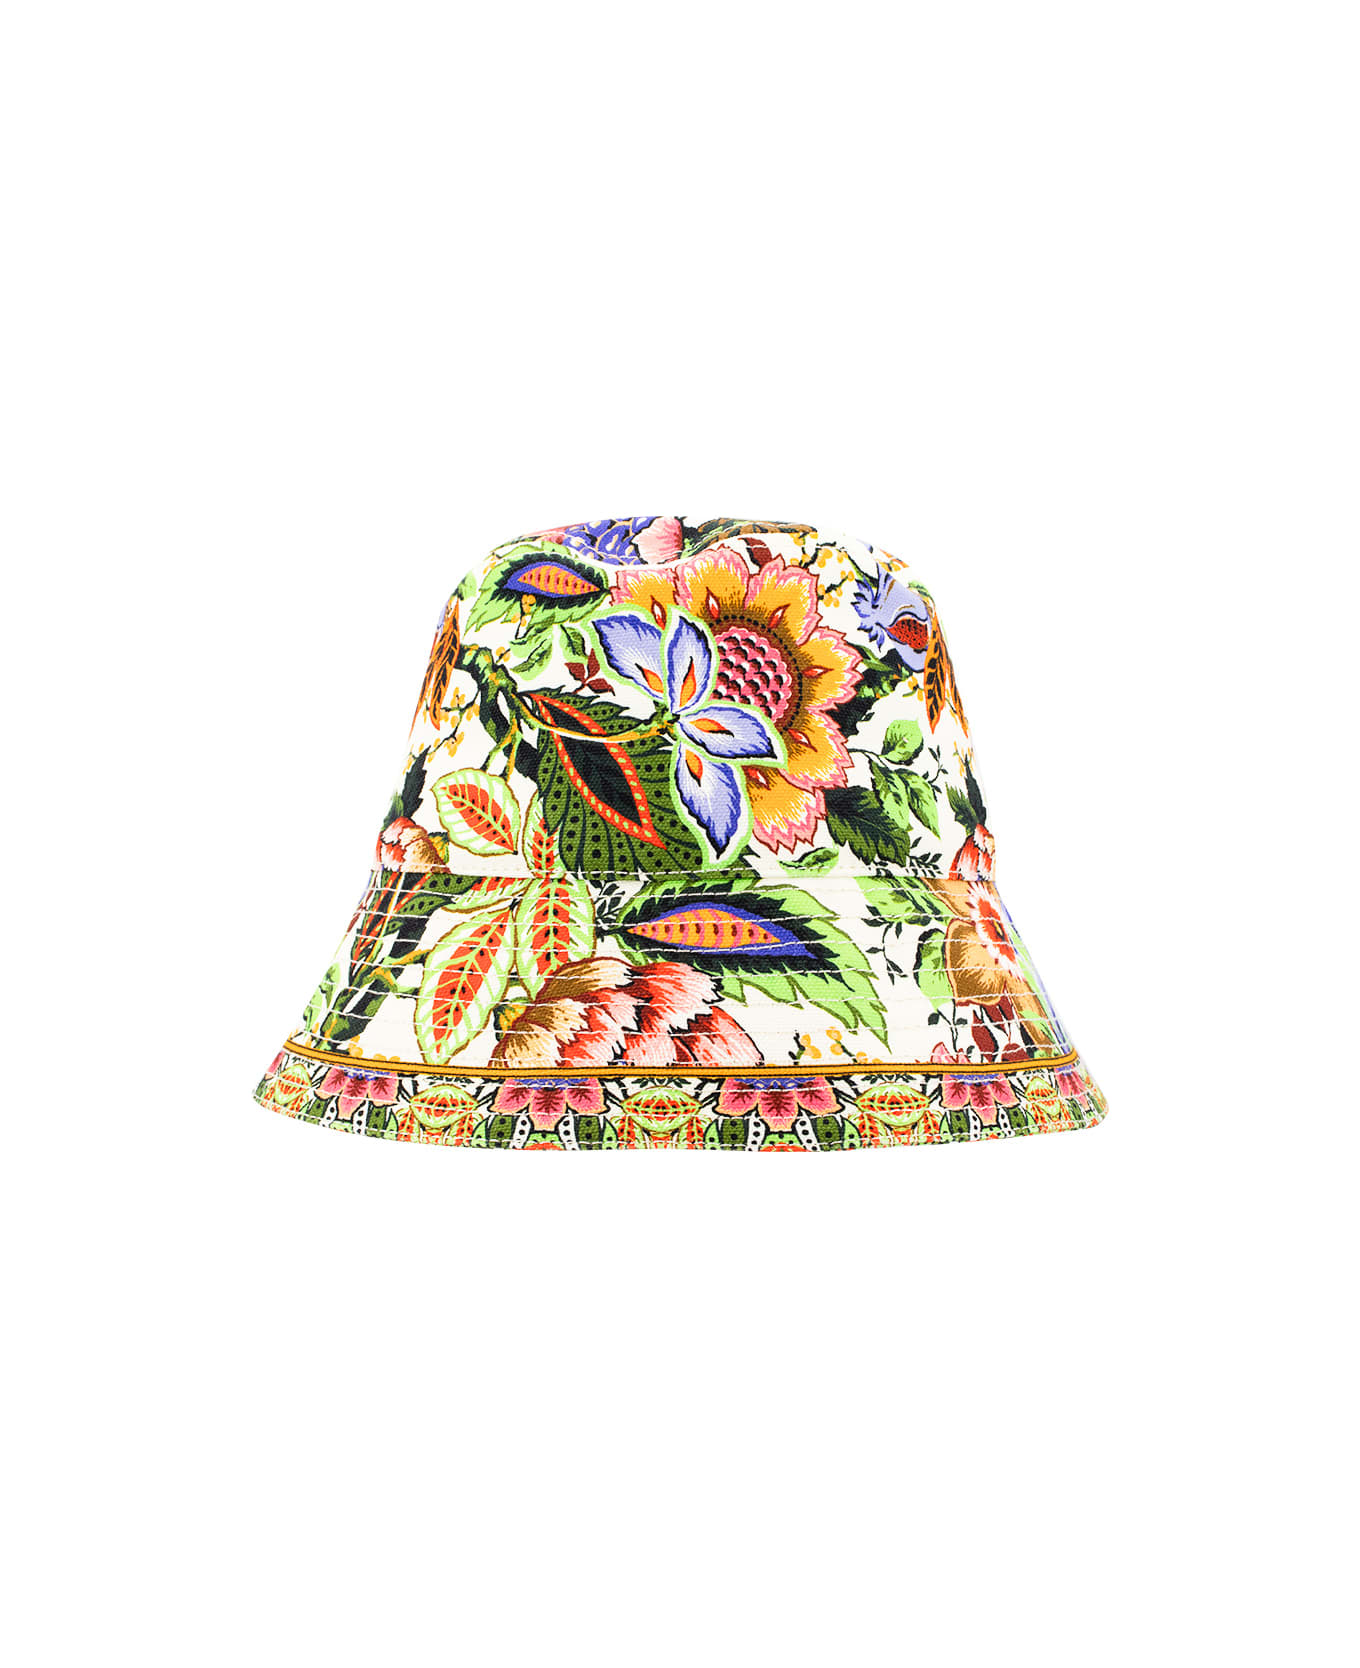 Etro Bucket Hat With Multicolored Print - PRINT ON WHITE BASE 帽子